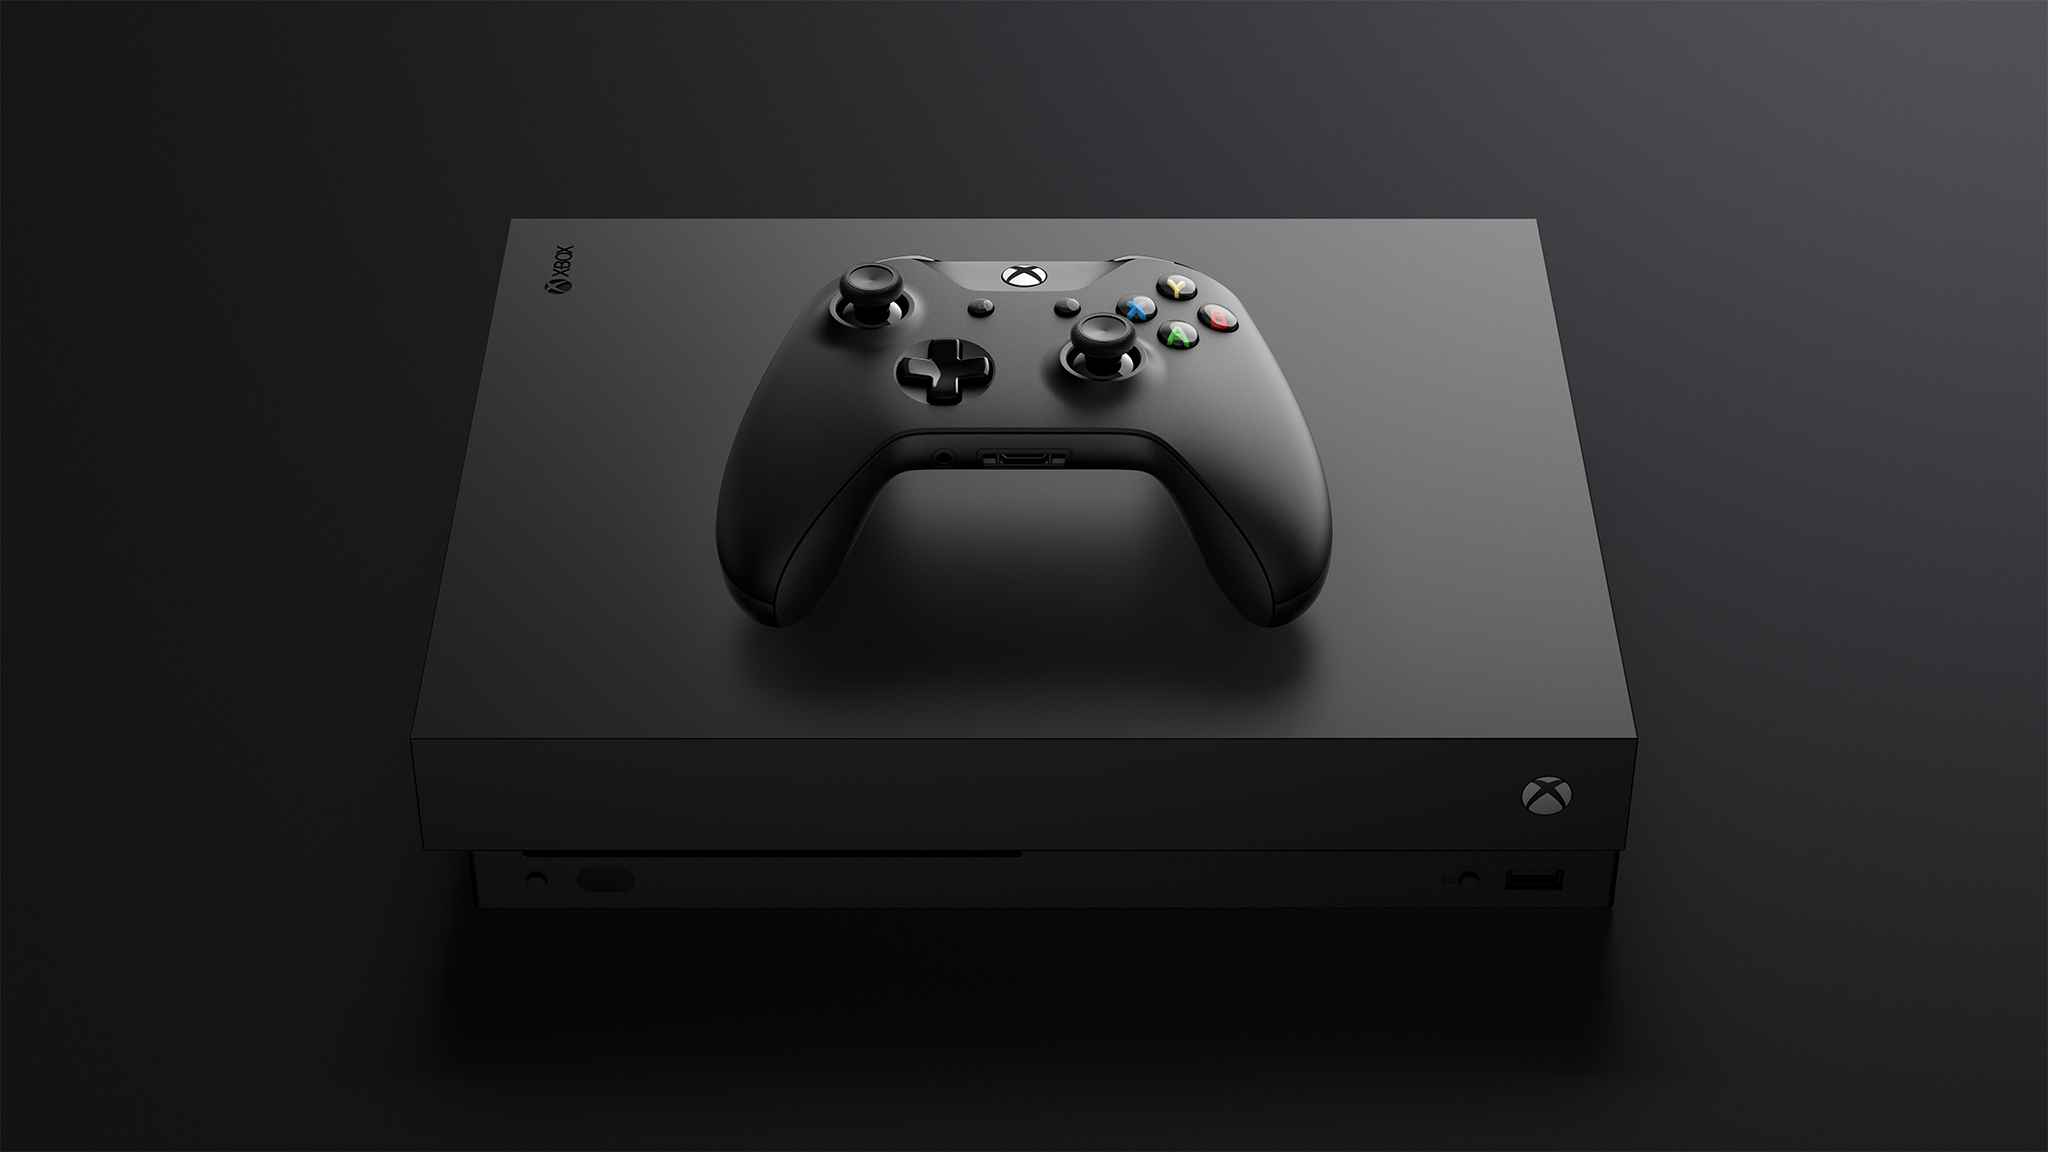 Microsoft Sunsets Xbox One, No More First-Party Games Developed 27